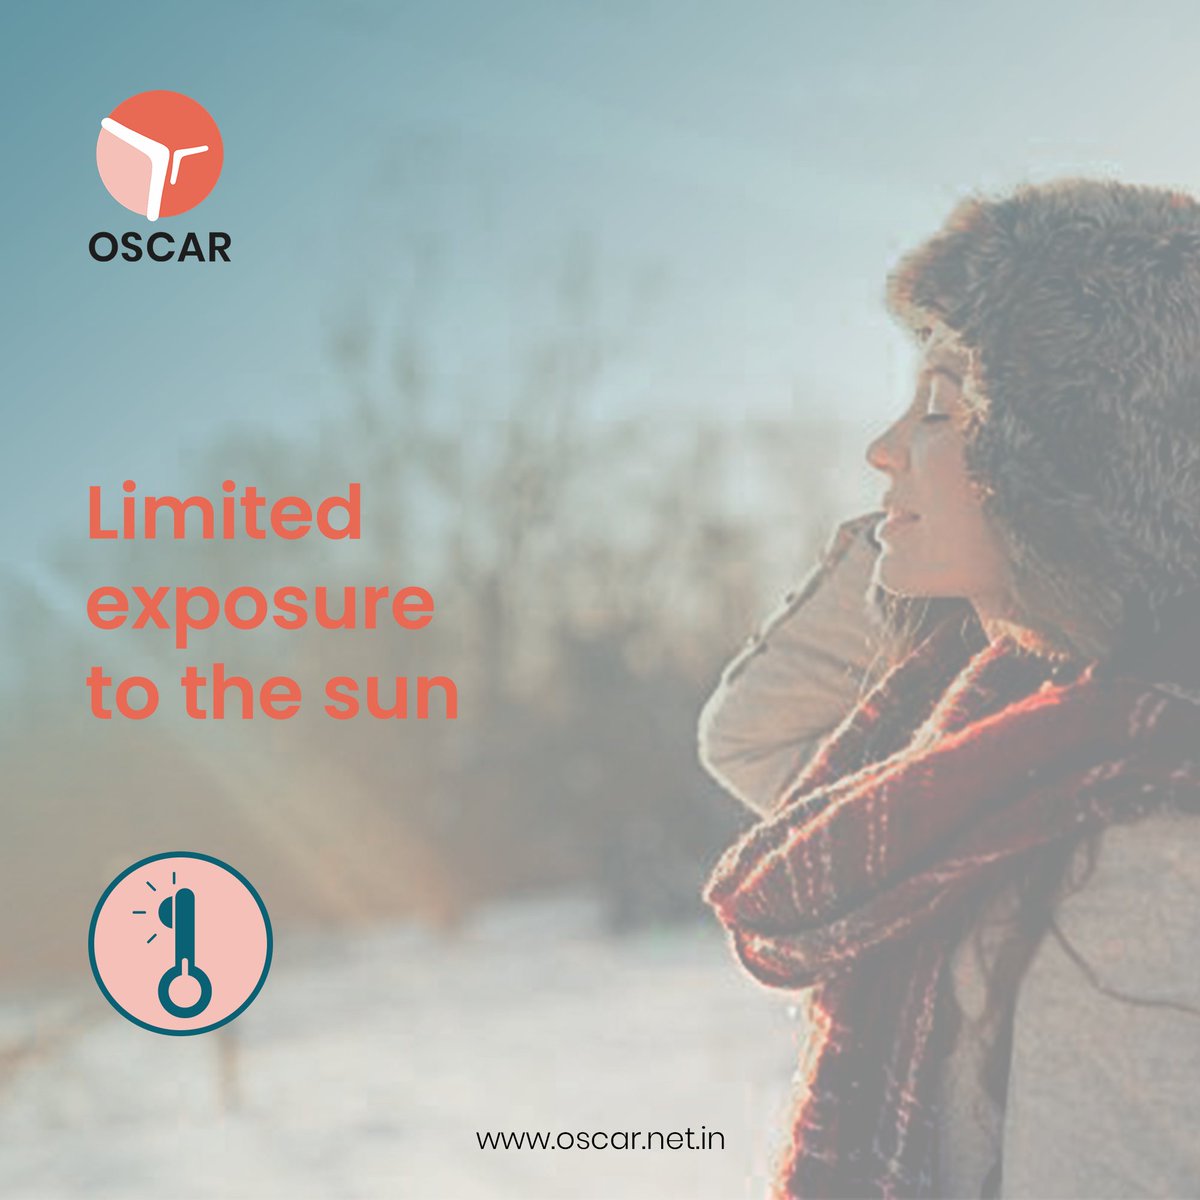 It's common to get cold and fever throughout the winter.

It's time to catch up with yourself and practice self-care.

Discover more: oscar.net.in

#Oscar #OscarBiotech #biotech #winterillness #winterhealth #coldweather #winter2023 #health #biotechcompany #rapidtests